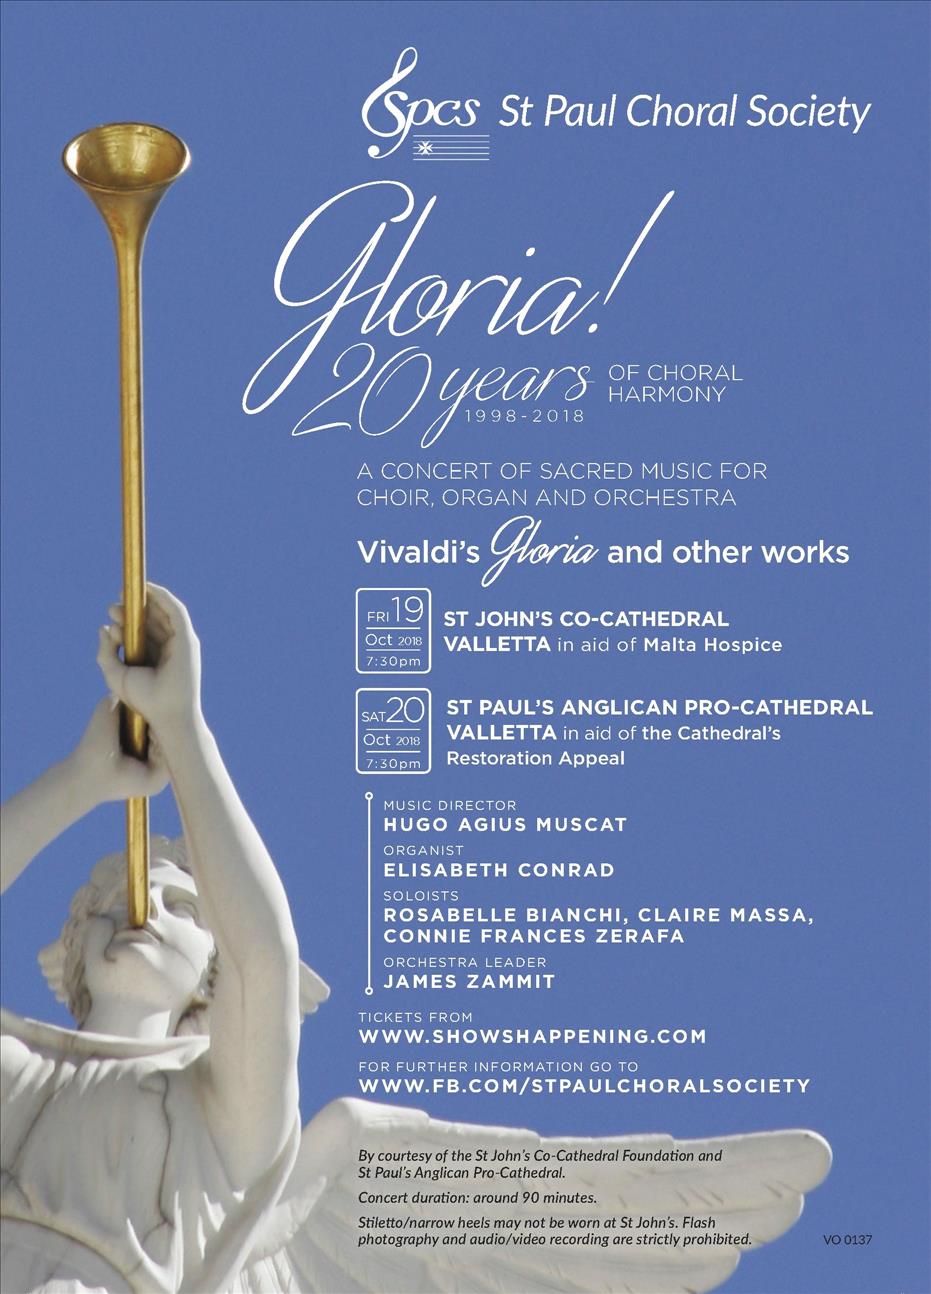 Gloria! 20 Years of Choral Harmony - Vivaldi's Gloria and other sacred works (SPCS 20th Anniversary Concert) poster